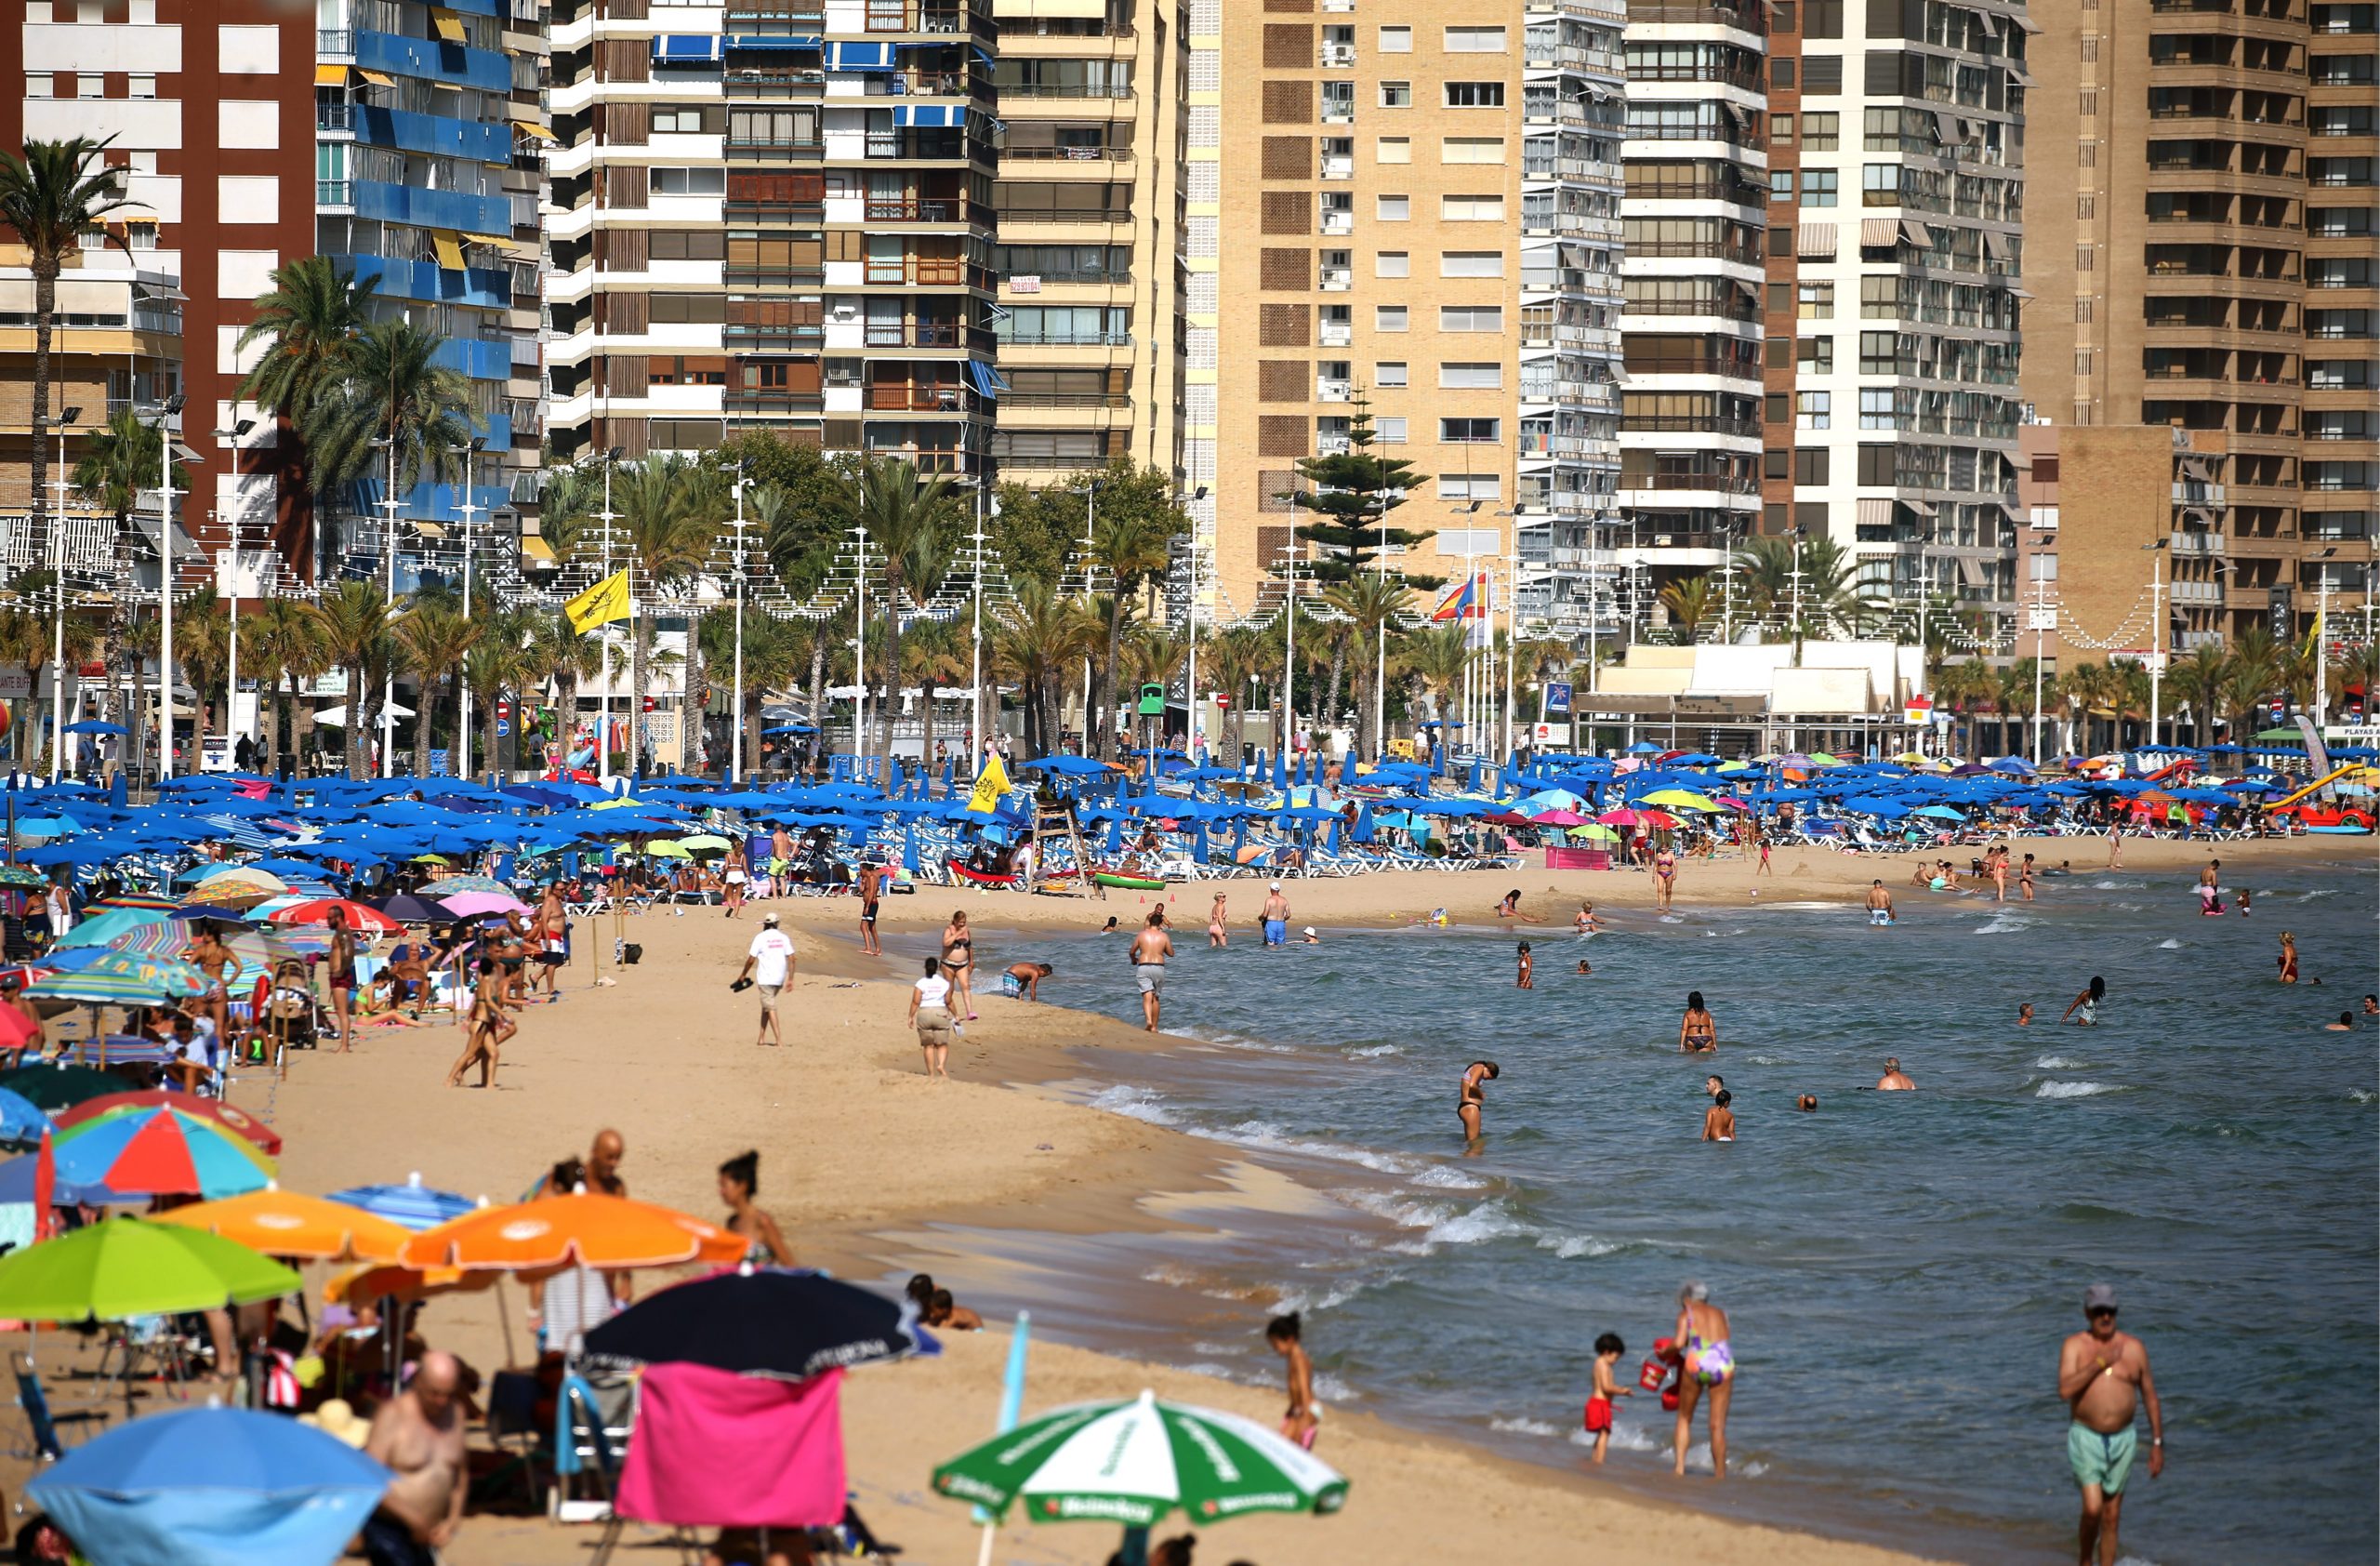 Benidorm hotels say Spain ought to copy England in scrapping COVID restrictions